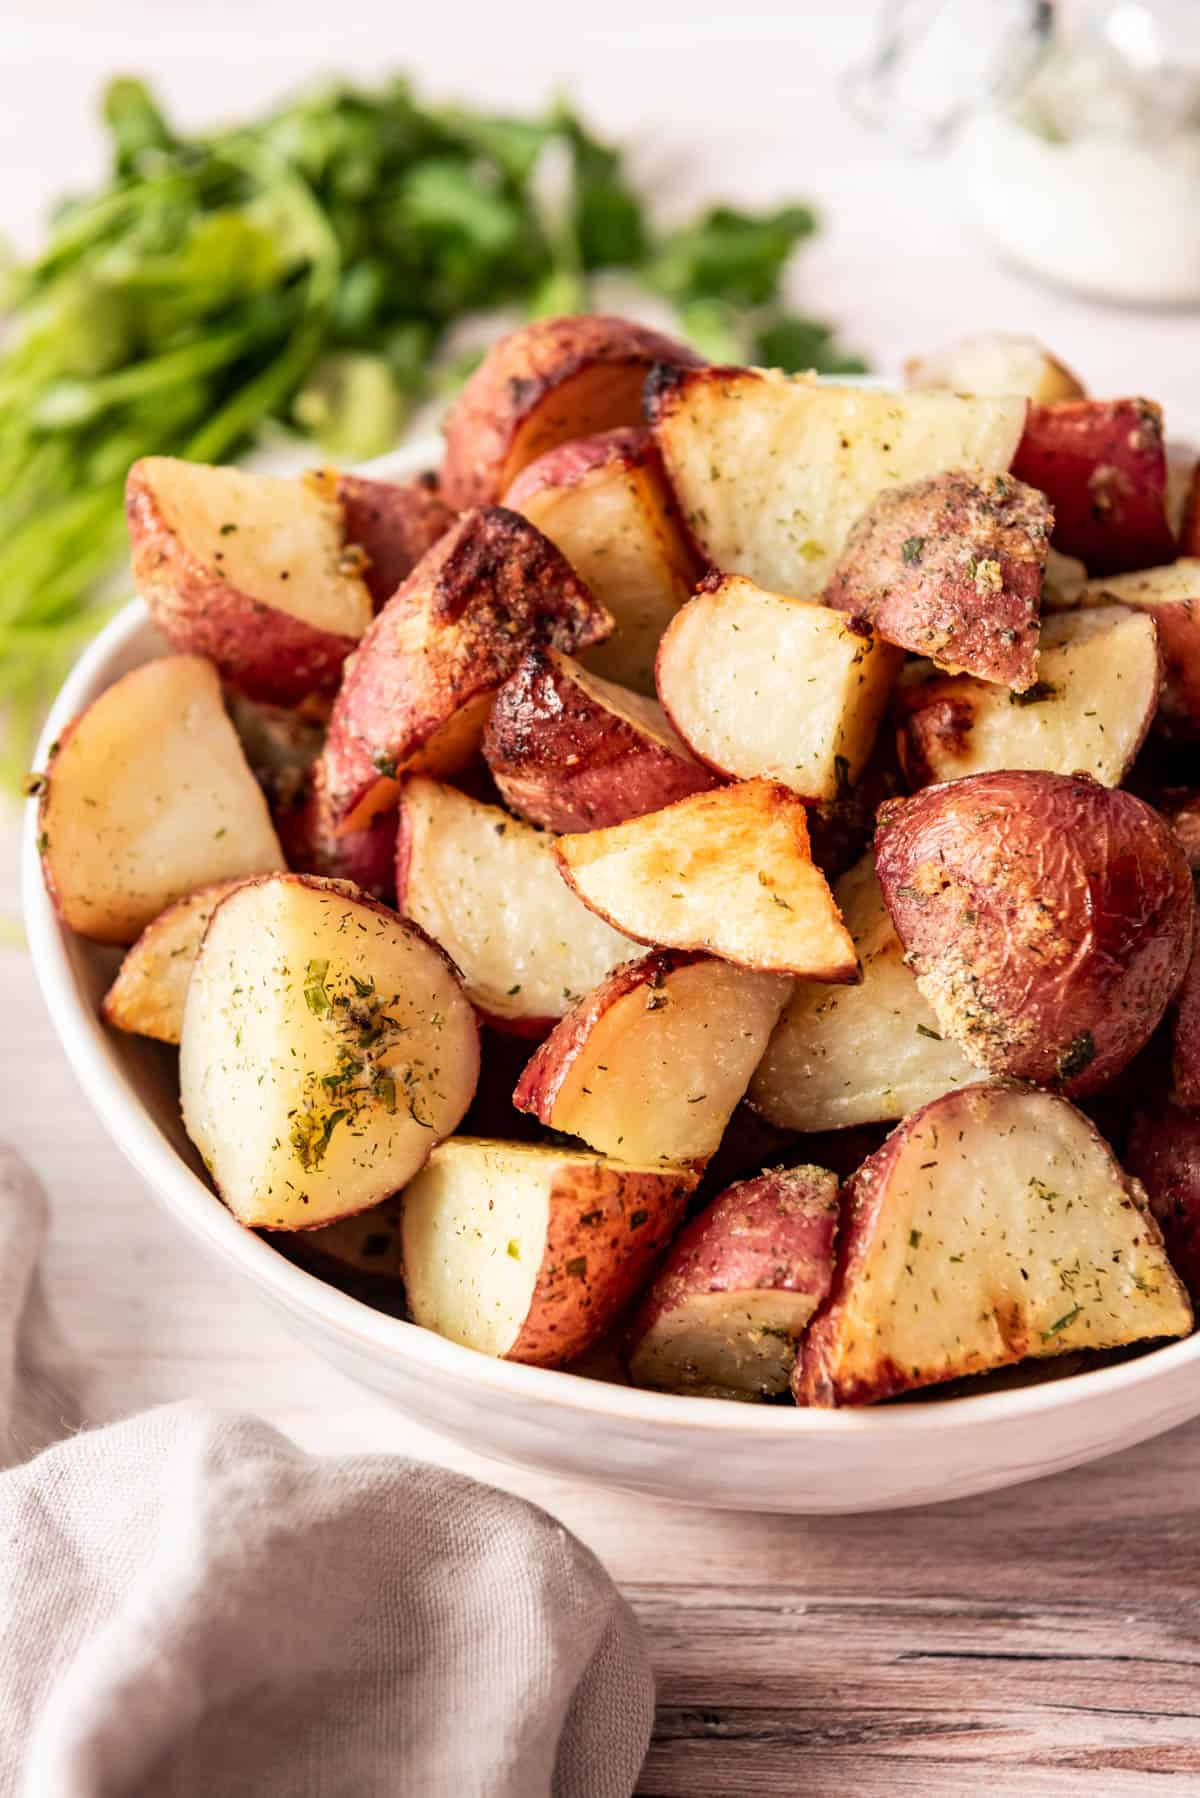 Roasted red potatoes with ranch seasoning in a white bowl.